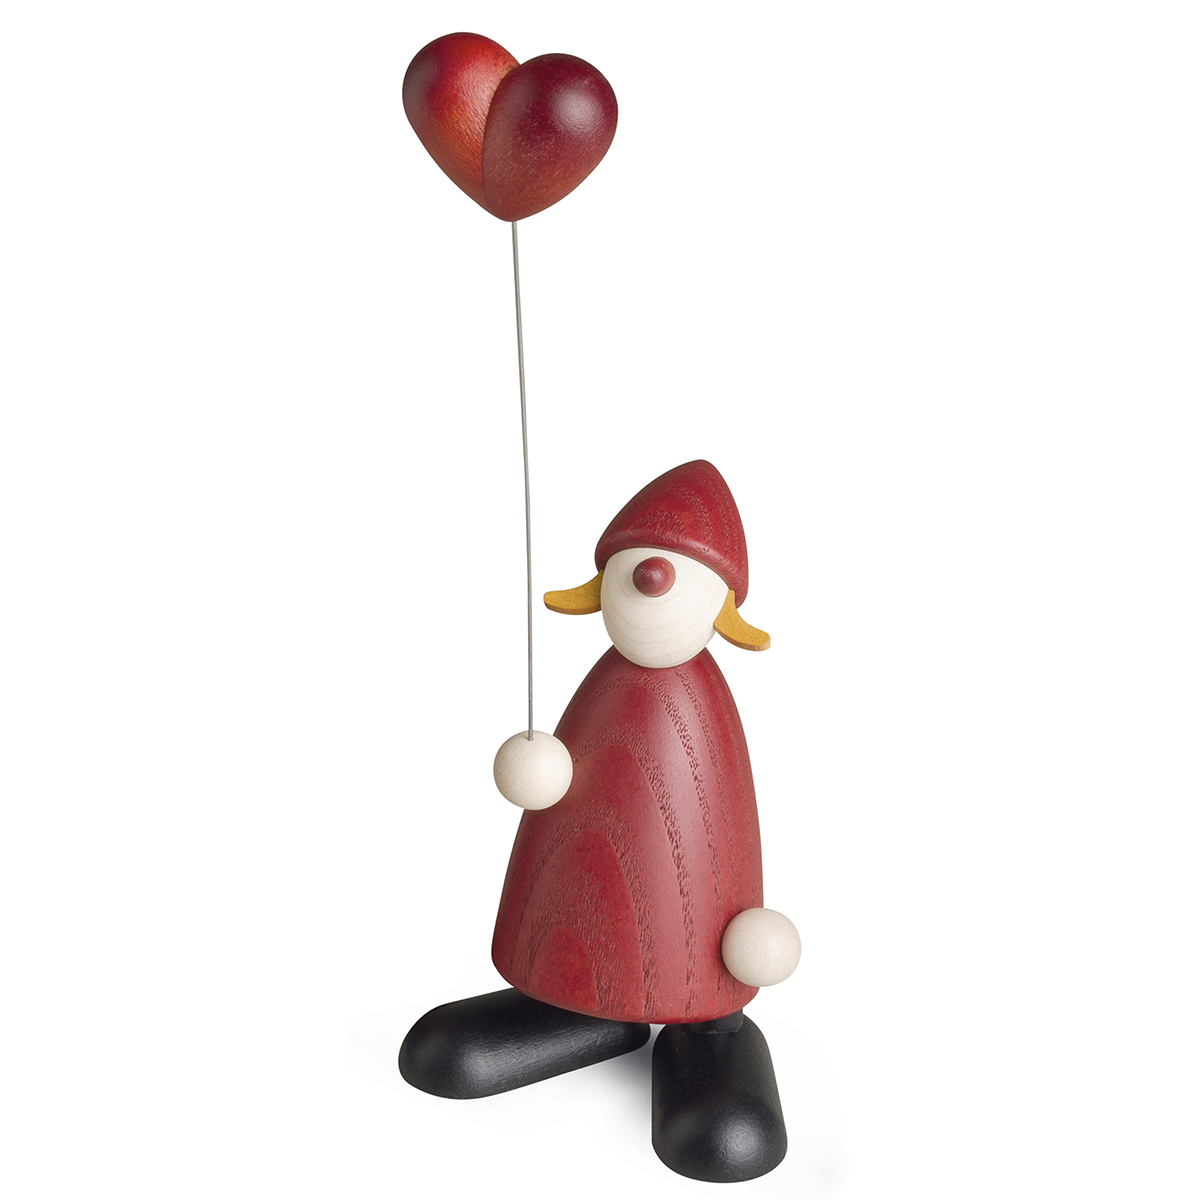 Mrs Claus holding a heart, small